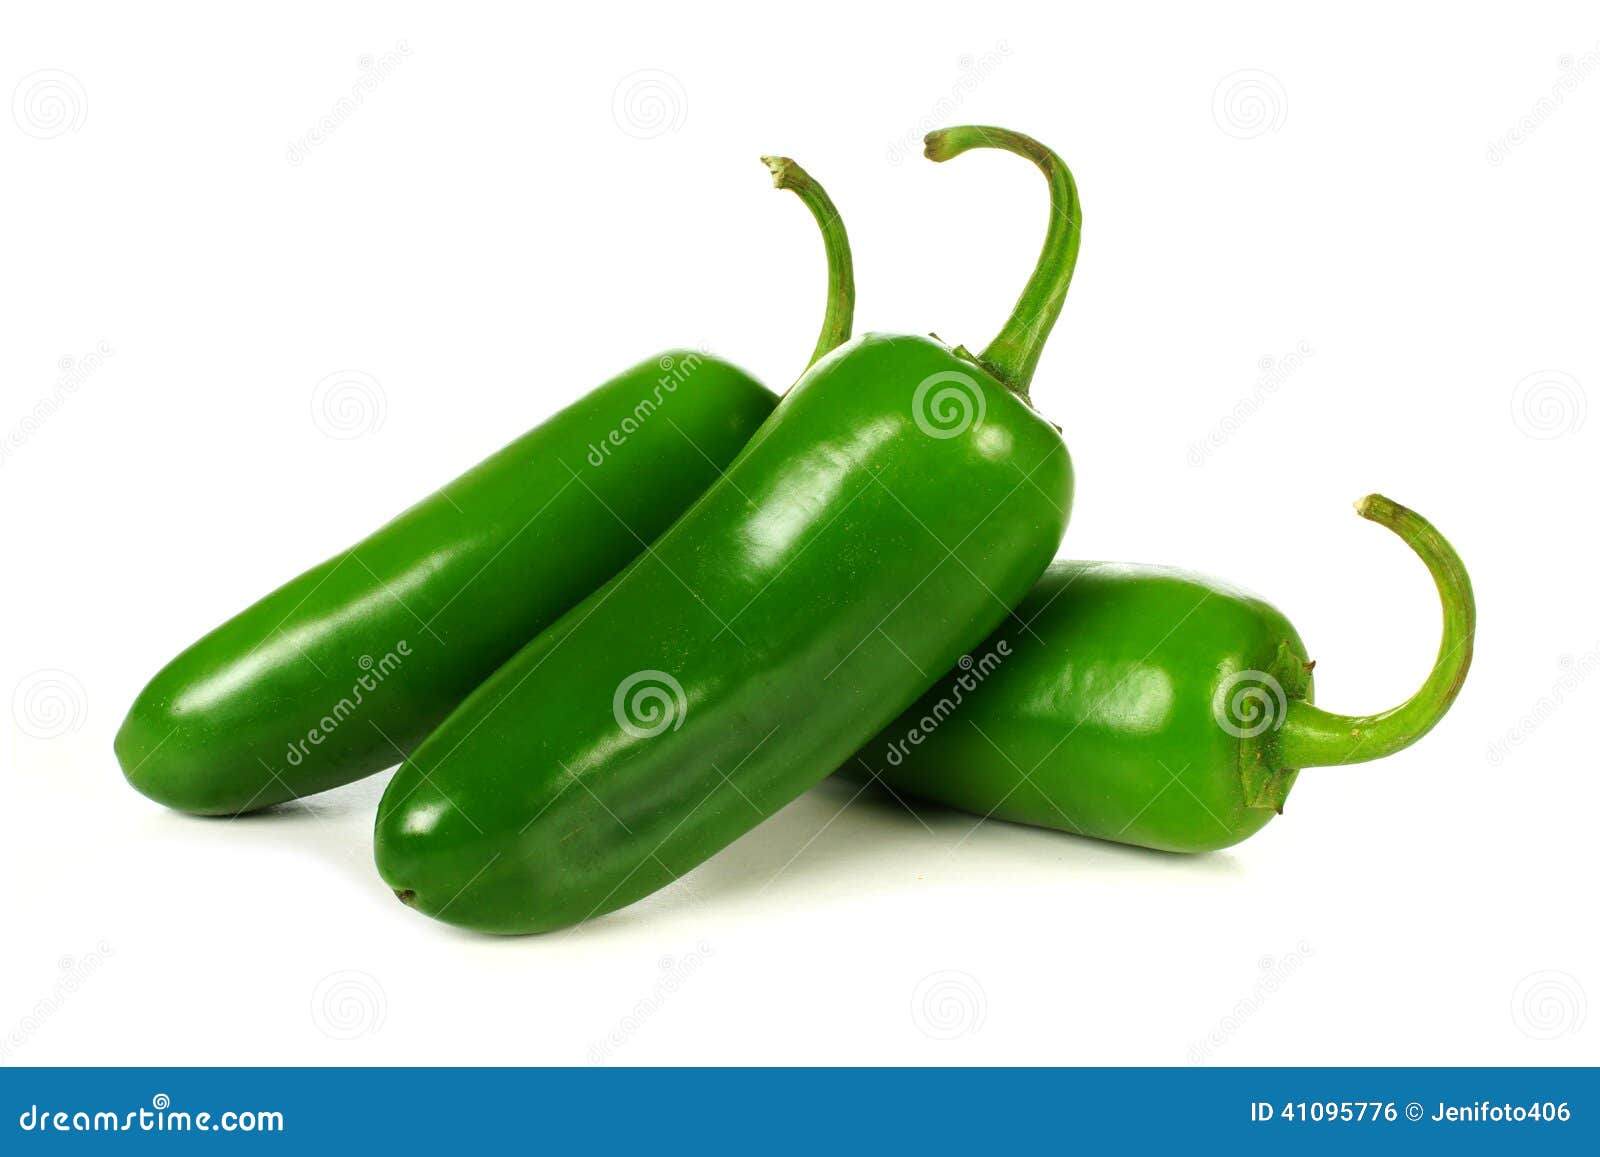 group of jalapeno peppers